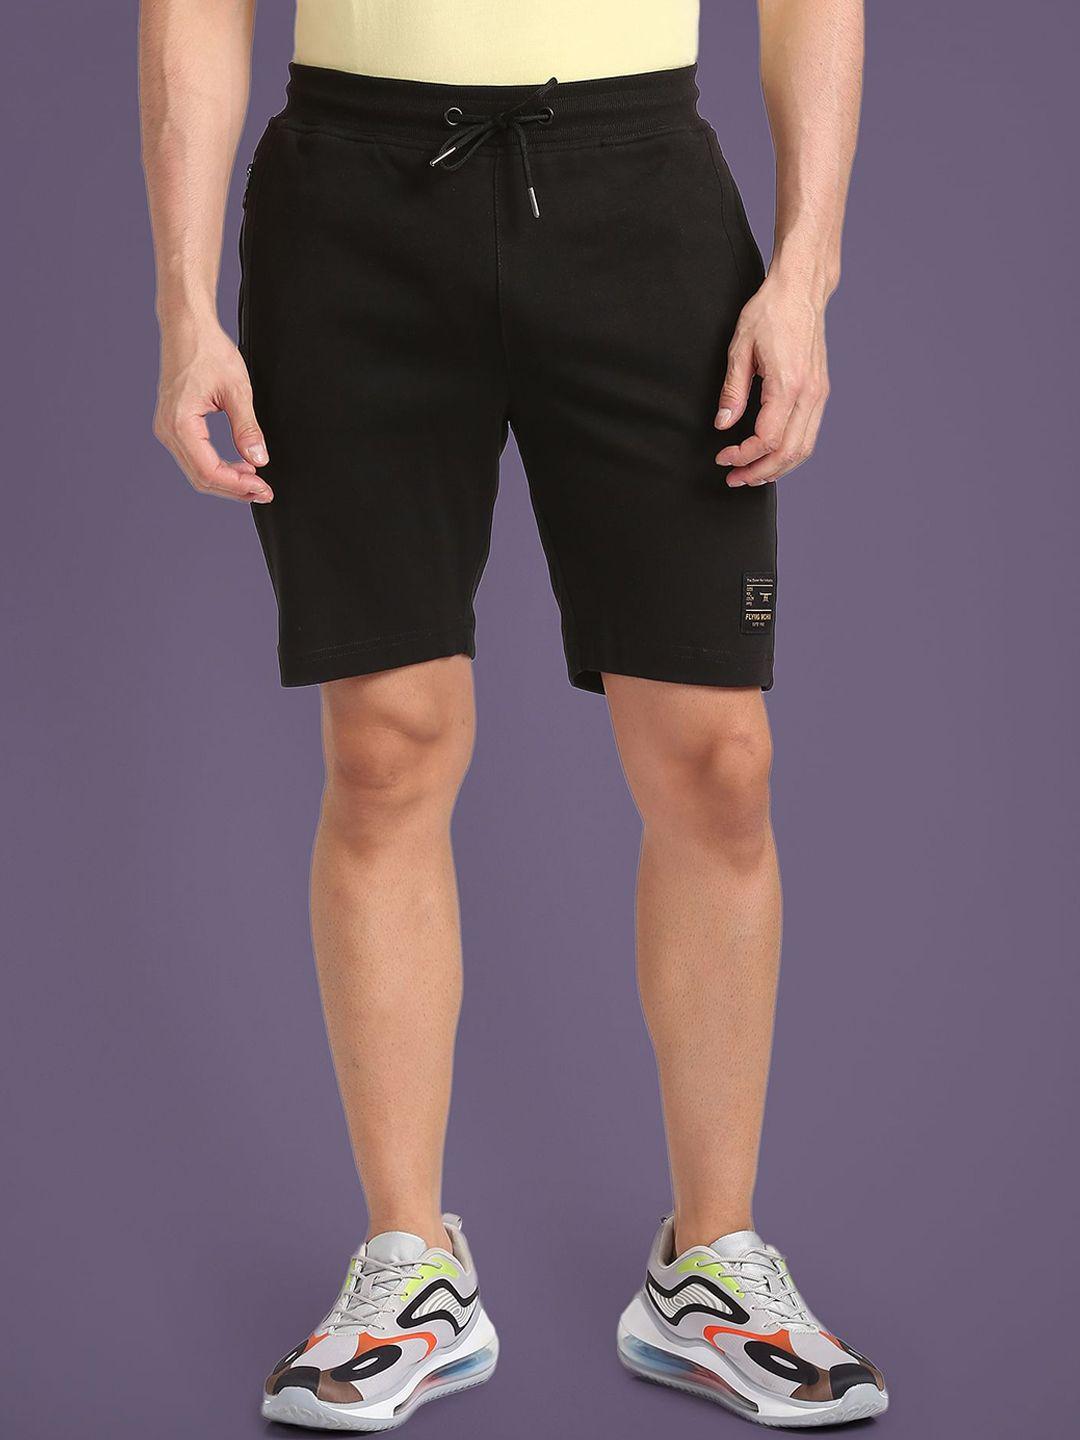 flying-machine-men-mid-rise-casual-cotton-shorts